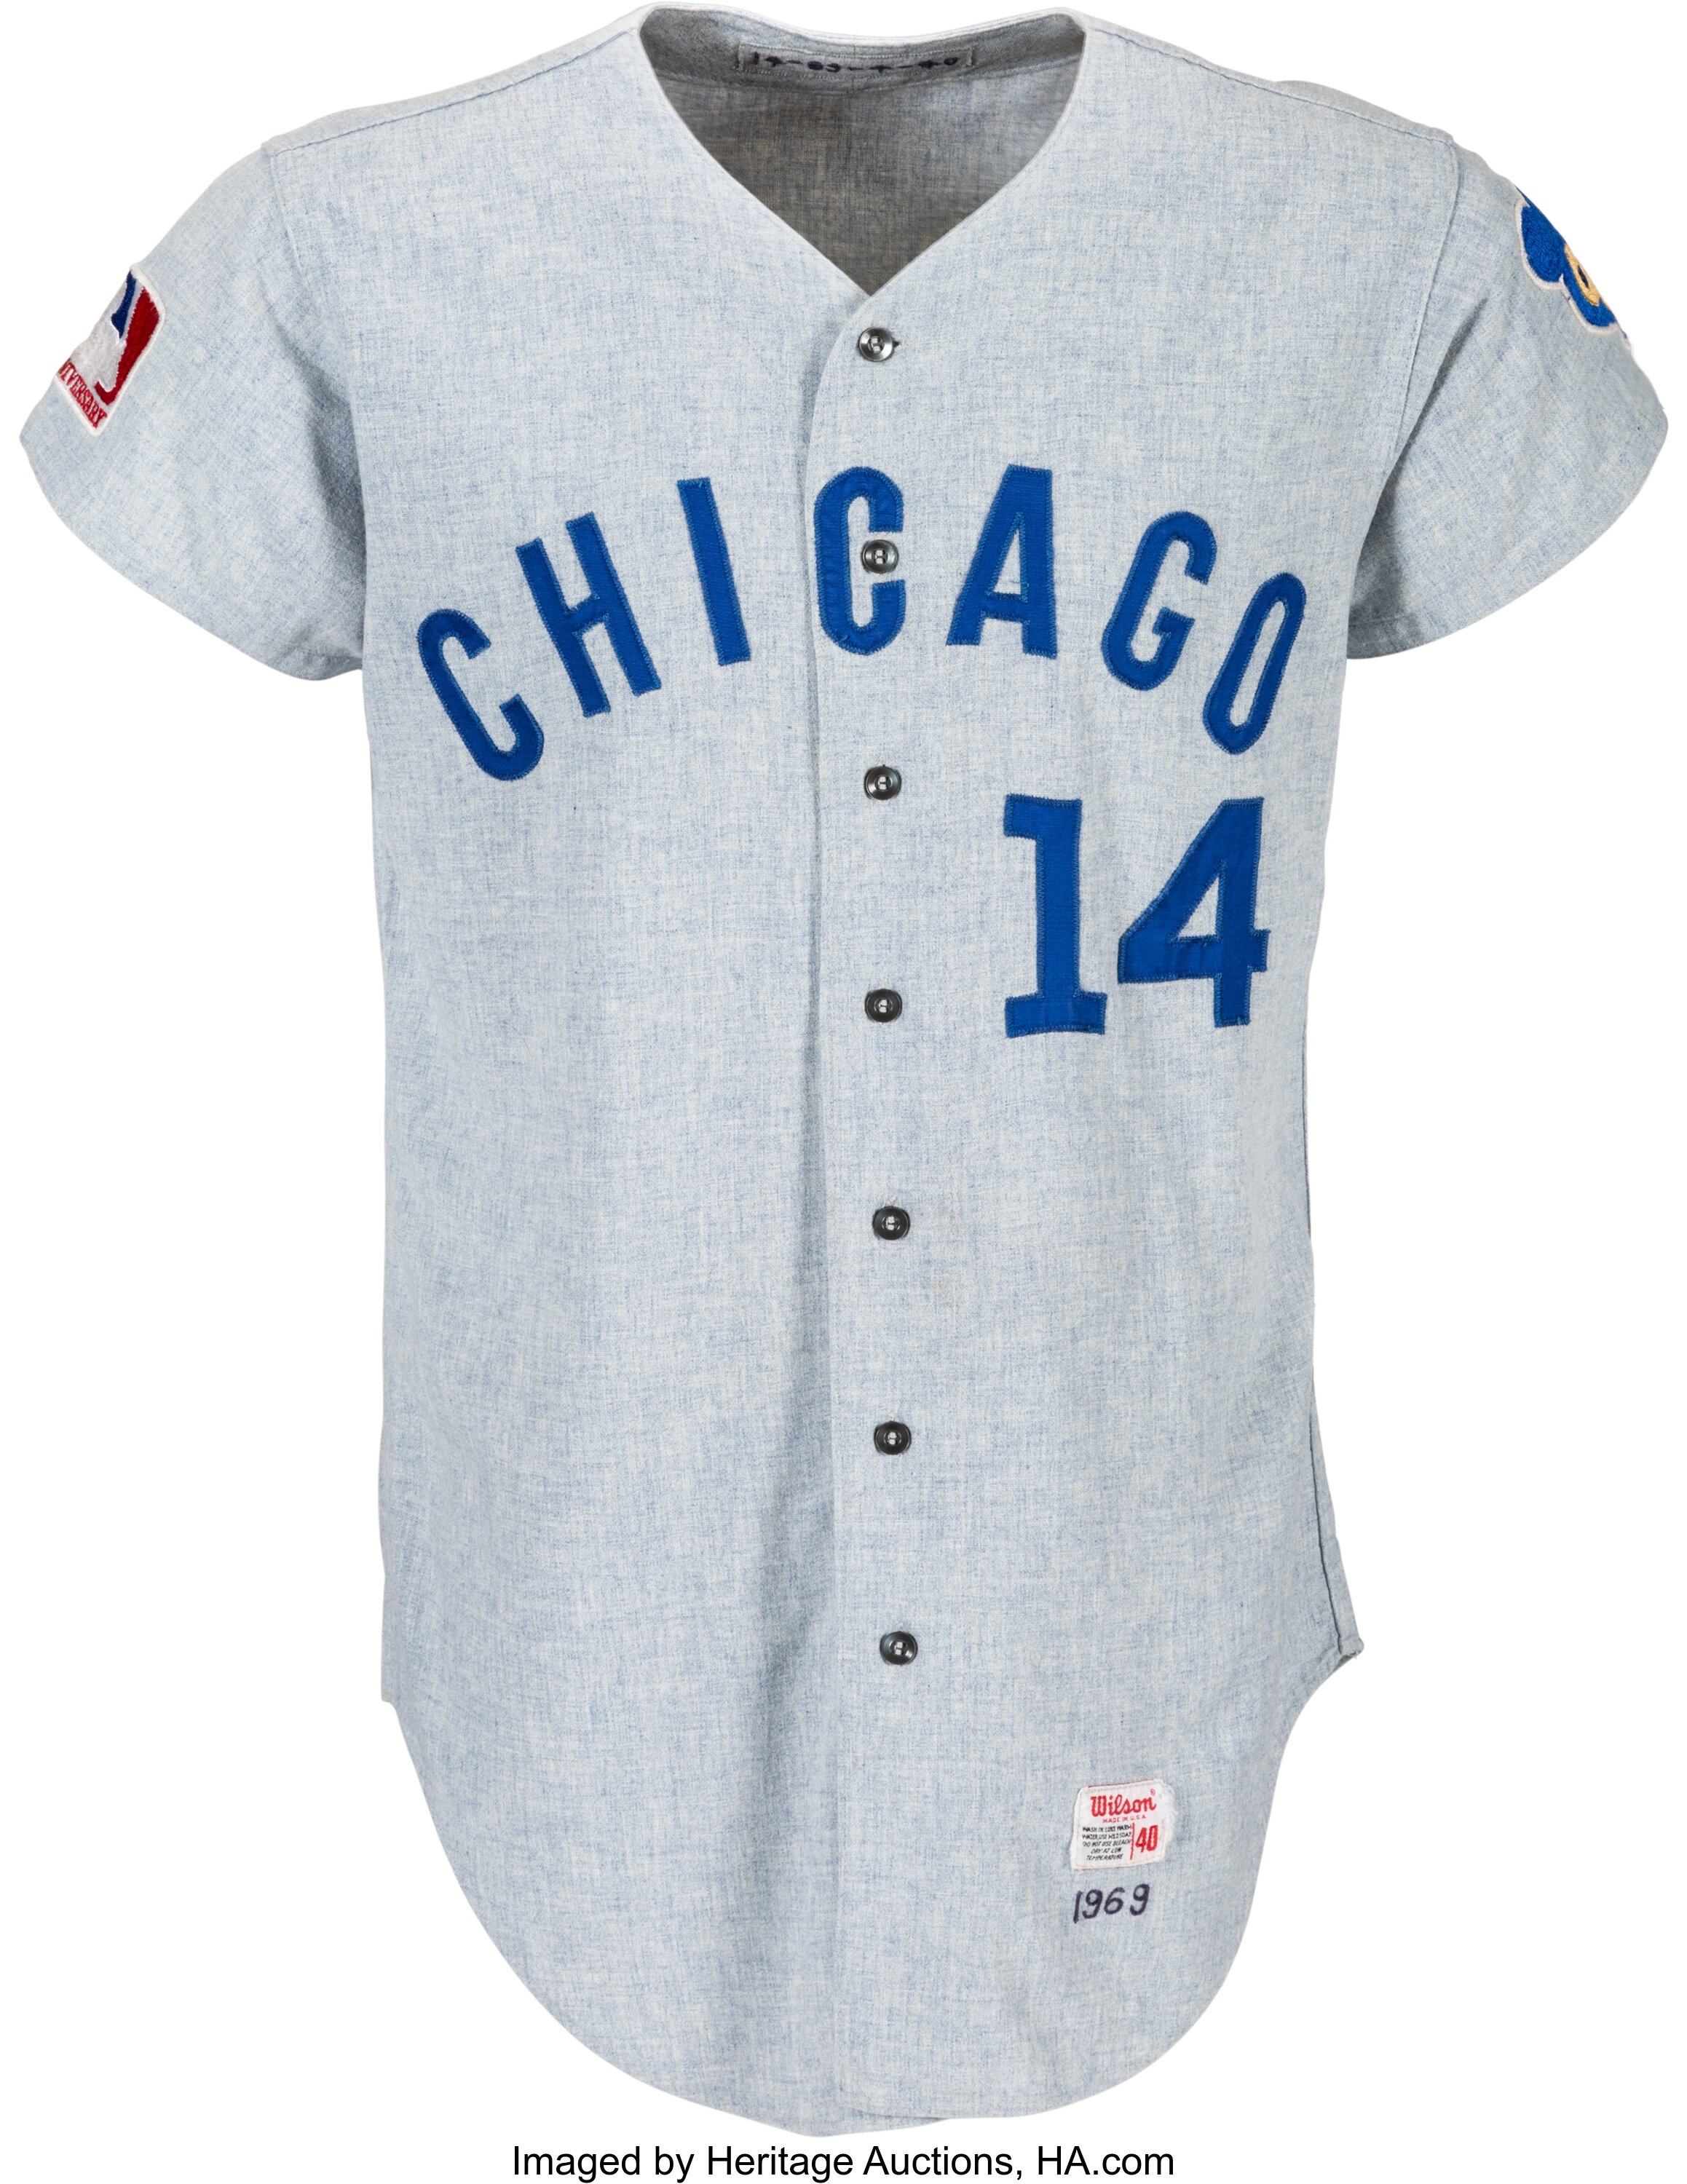 Ernie Banks 1969 Authentic Jersey Chicago Cubs Mitchell & Ness